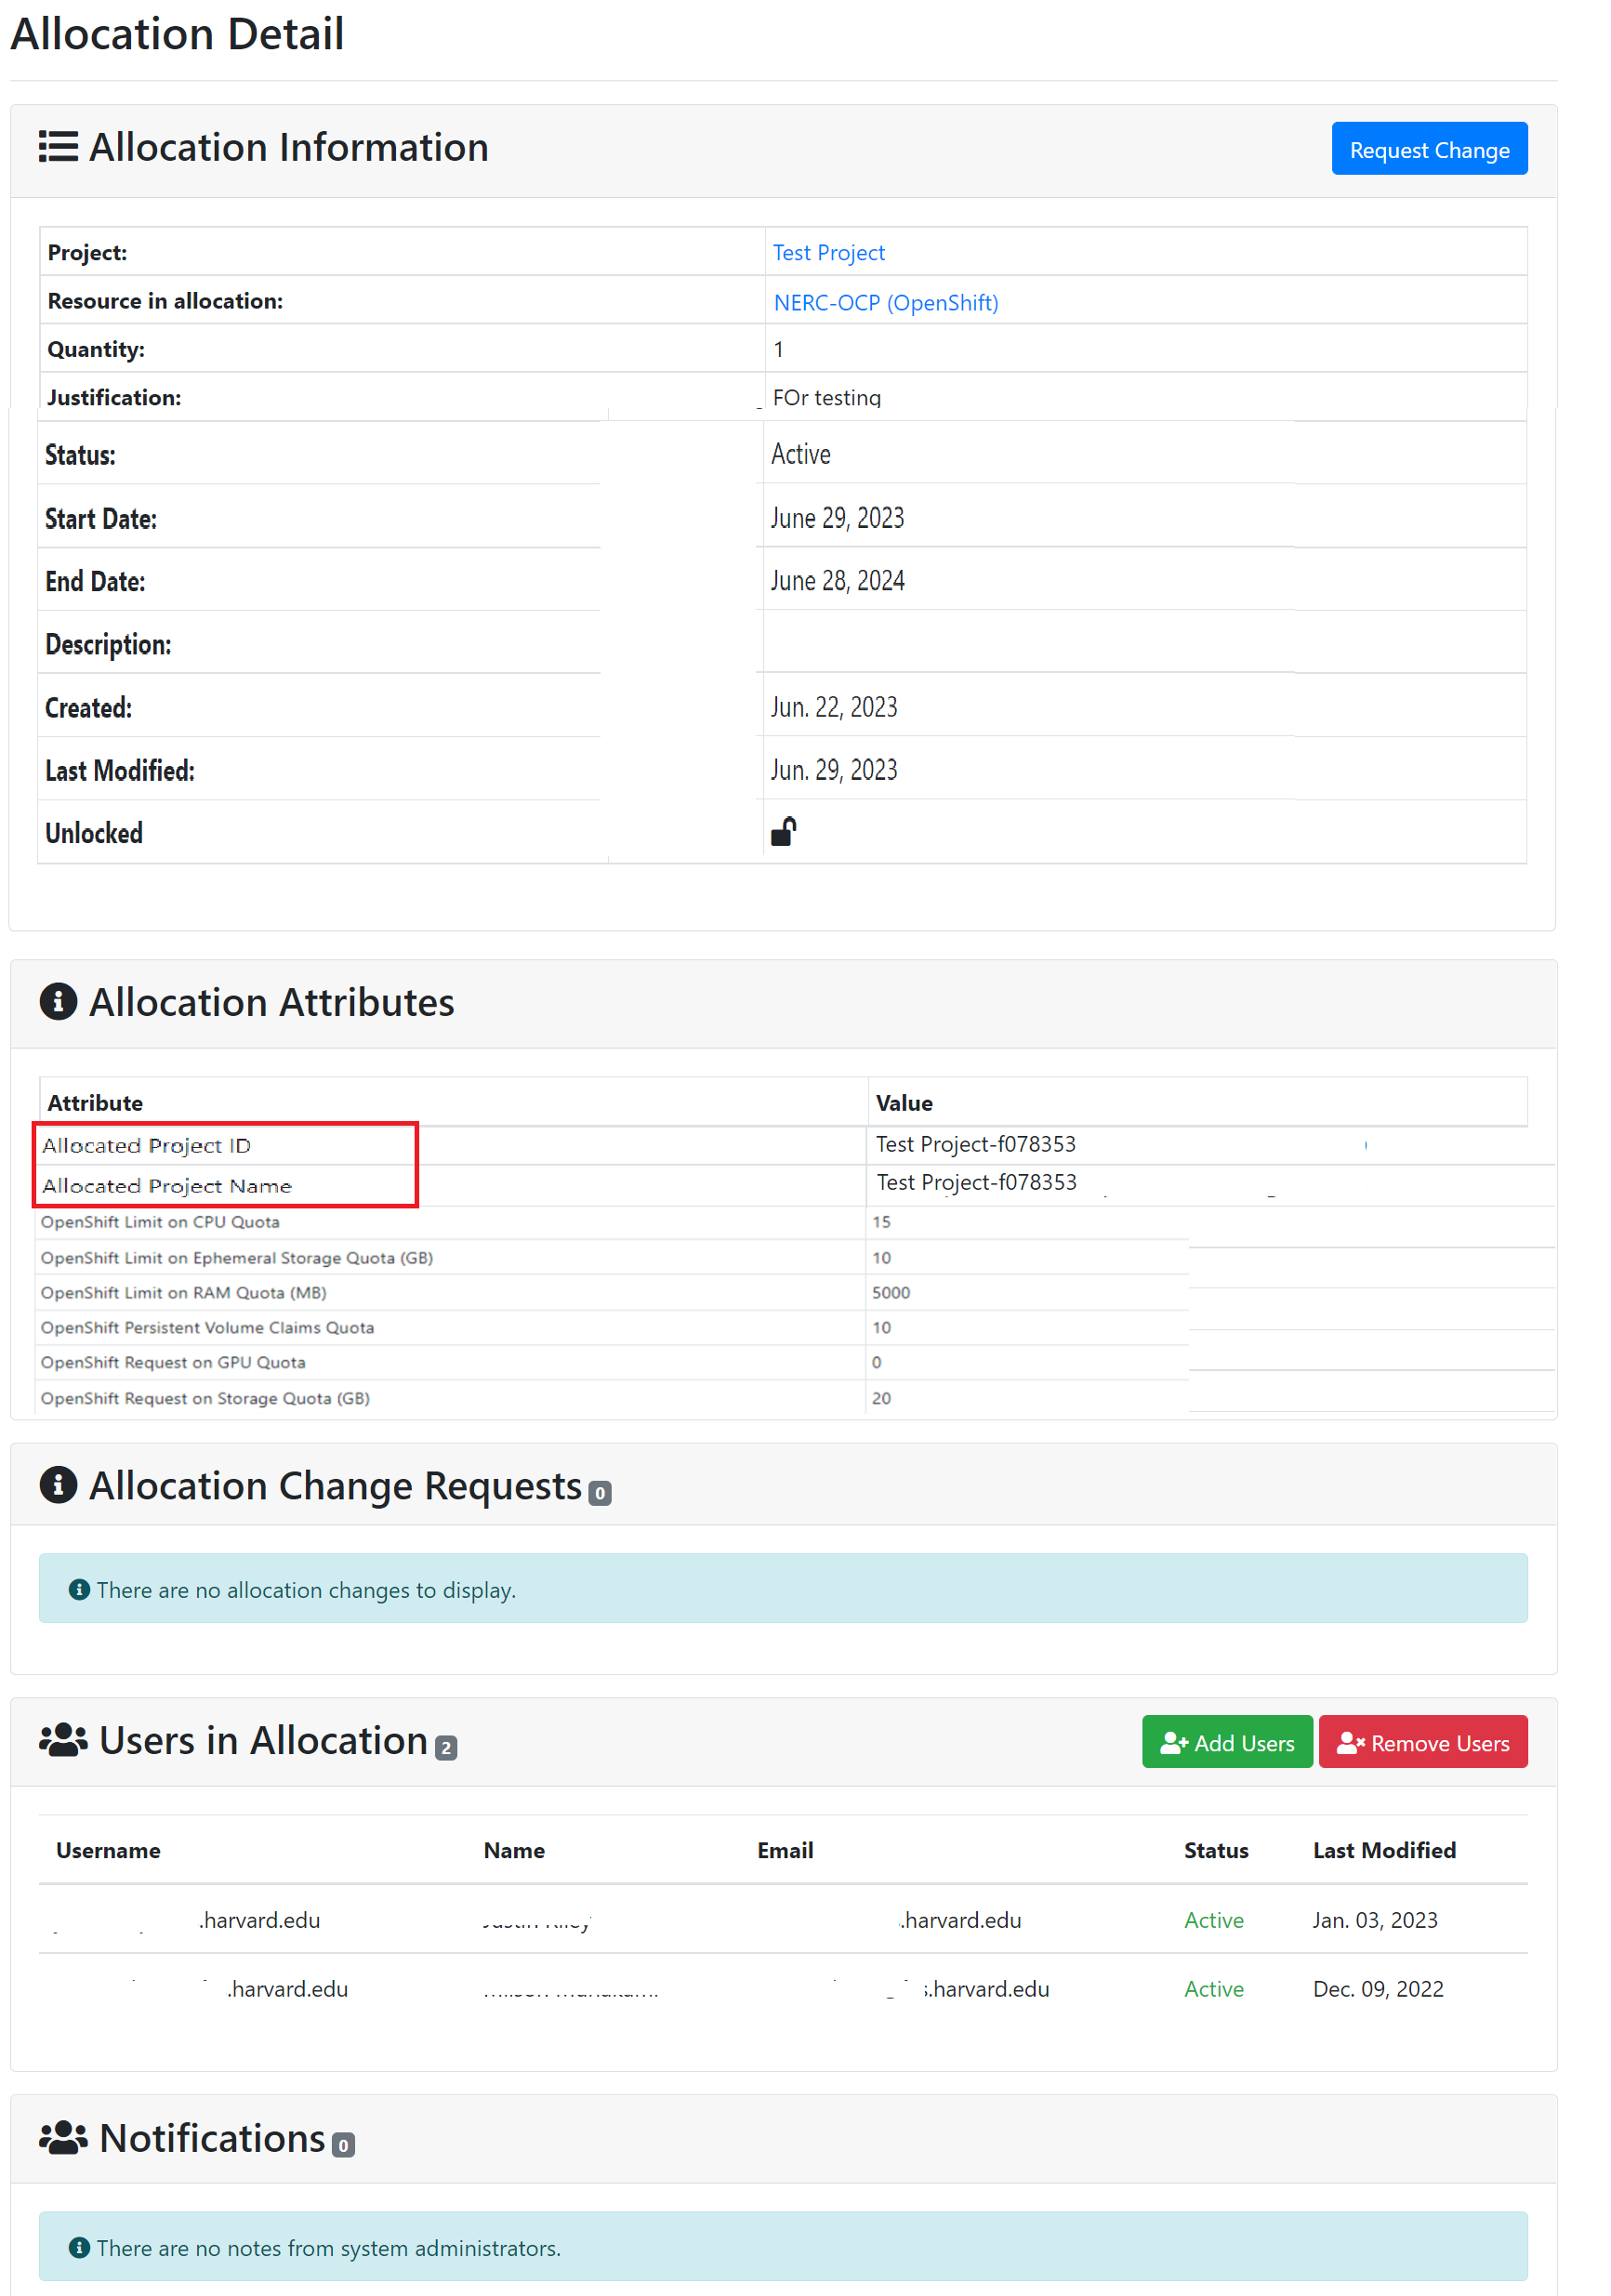 PI and Manager Allocation View of OpenShift Resource Allocation